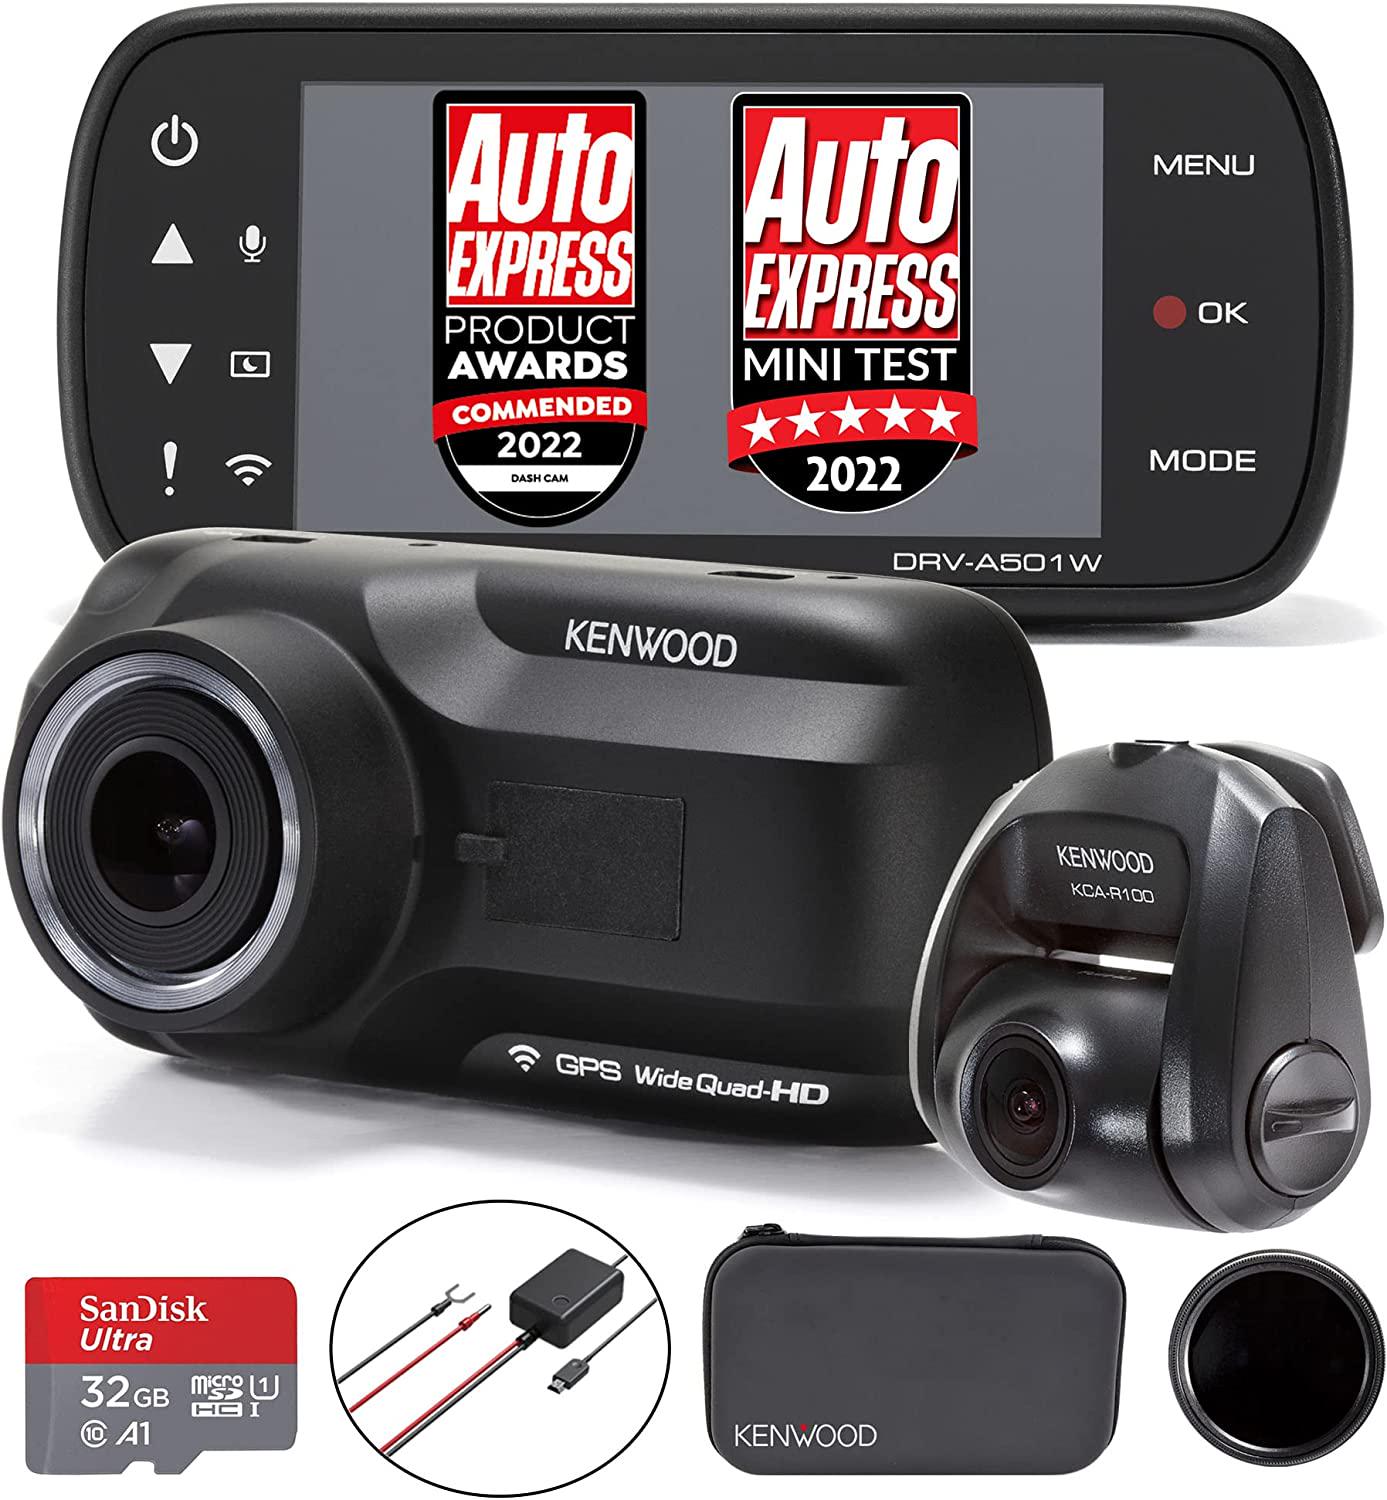 KENWOOD, KENWOOD DRV-A501W Front and Rear Dash Cam Bundle - KCA-R100 Rear Camera - CA-DR1030 Hardwire Kit - 32GB SD-Card - Carry Case - Smartphone App